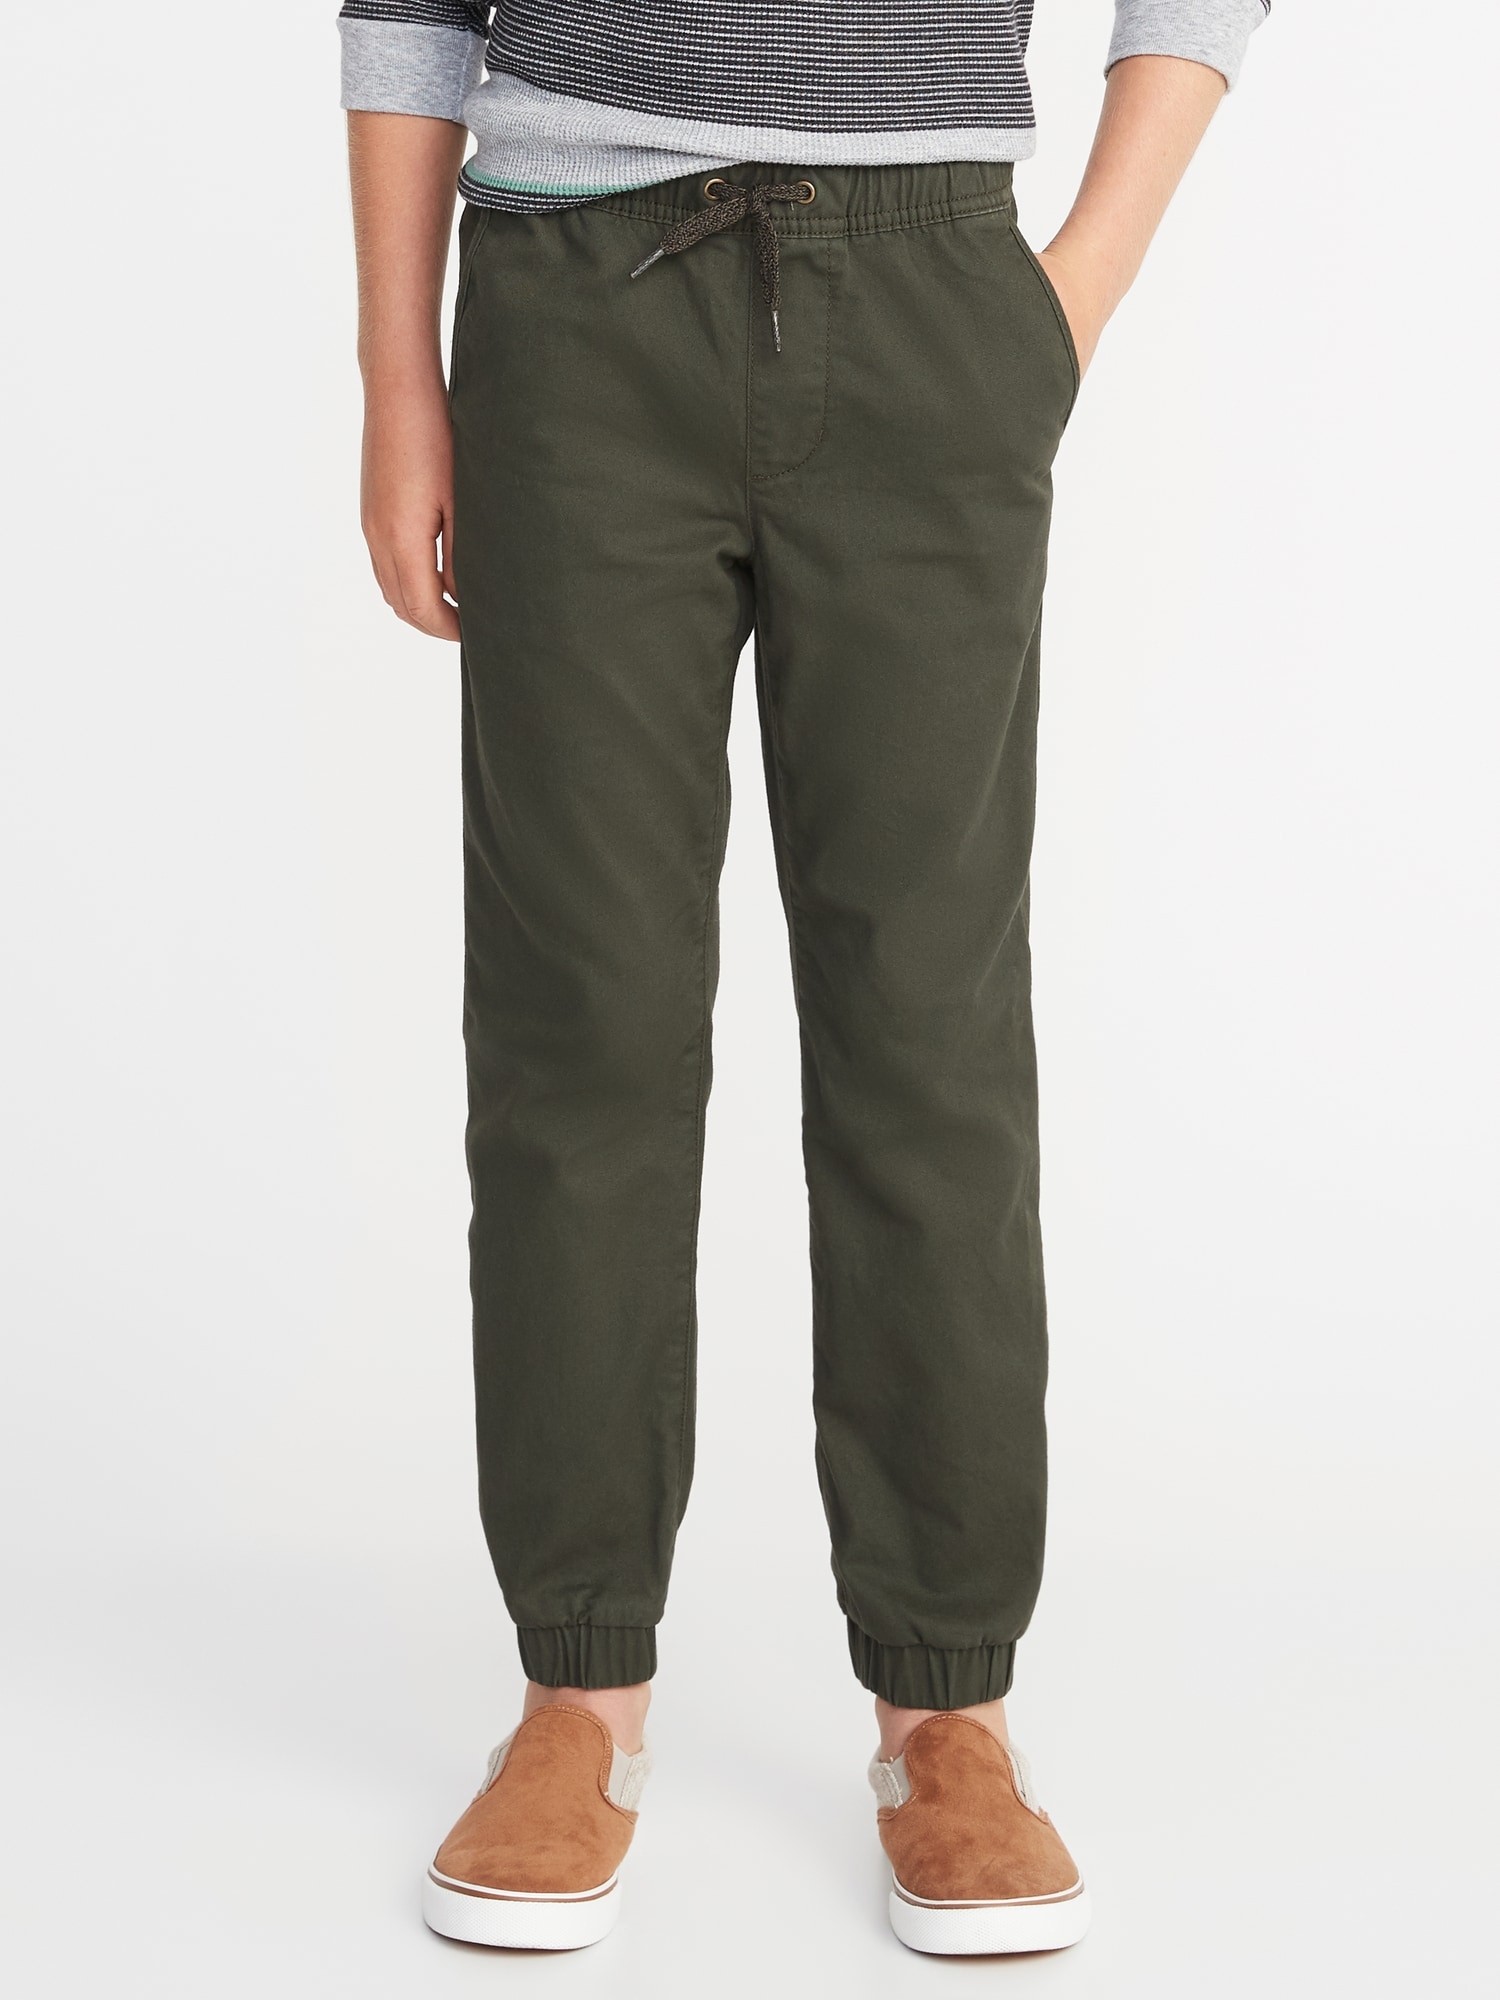 Old Navy Built-In Flex Twill Jogger Pants for Boys green - 499090062